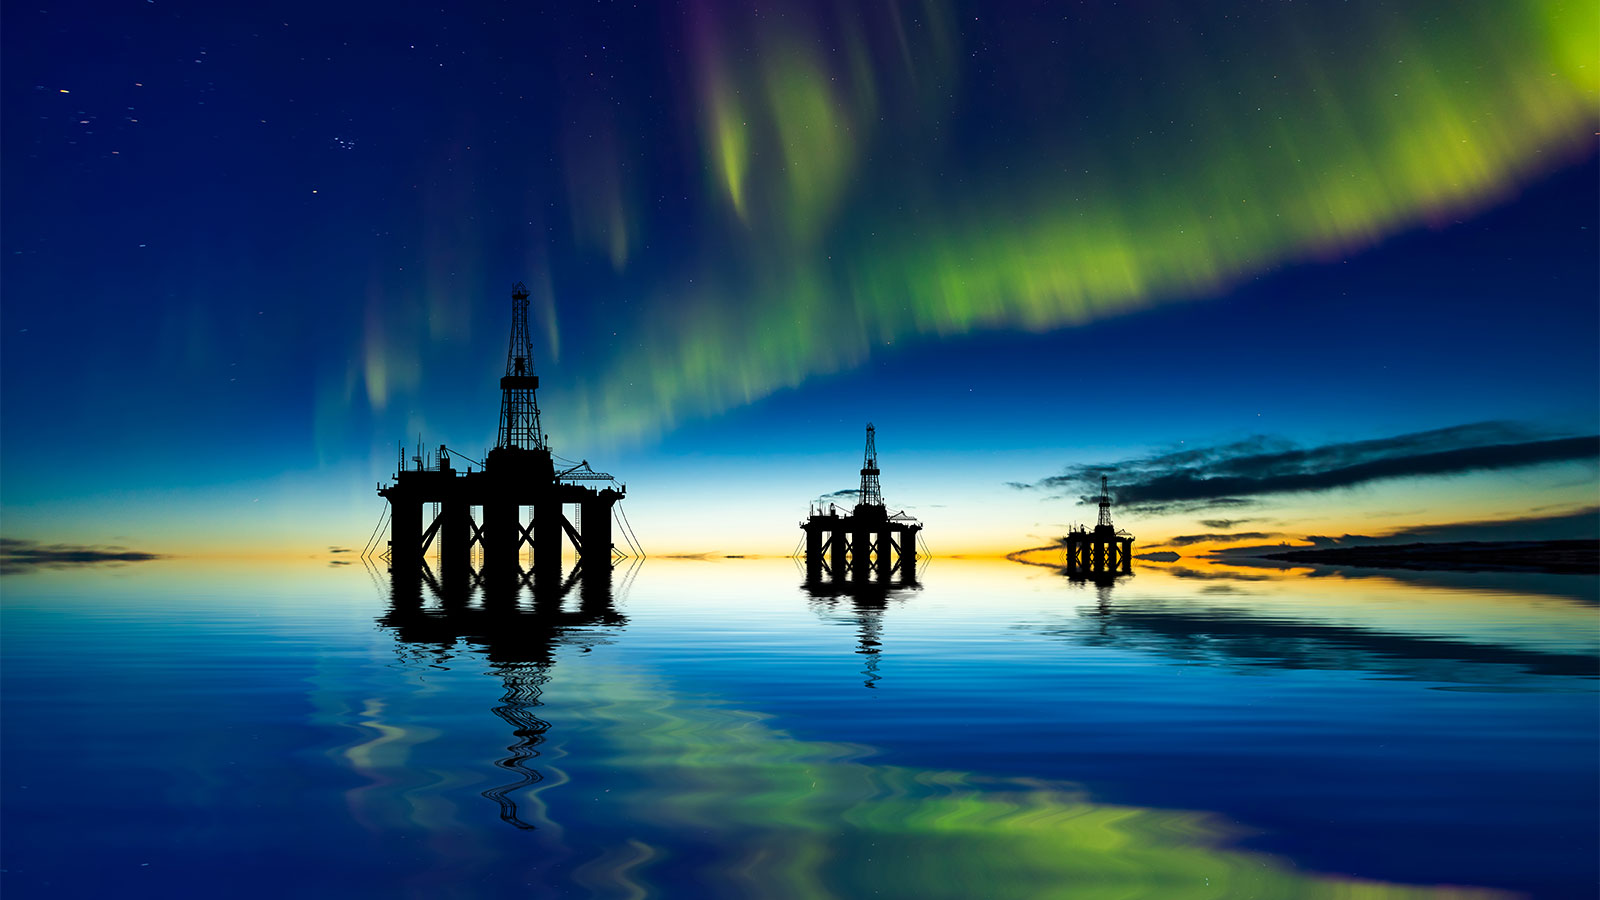 Silhouettes of three offshore oil rigs with the northern lights in the sky above them, and reflected in the water below